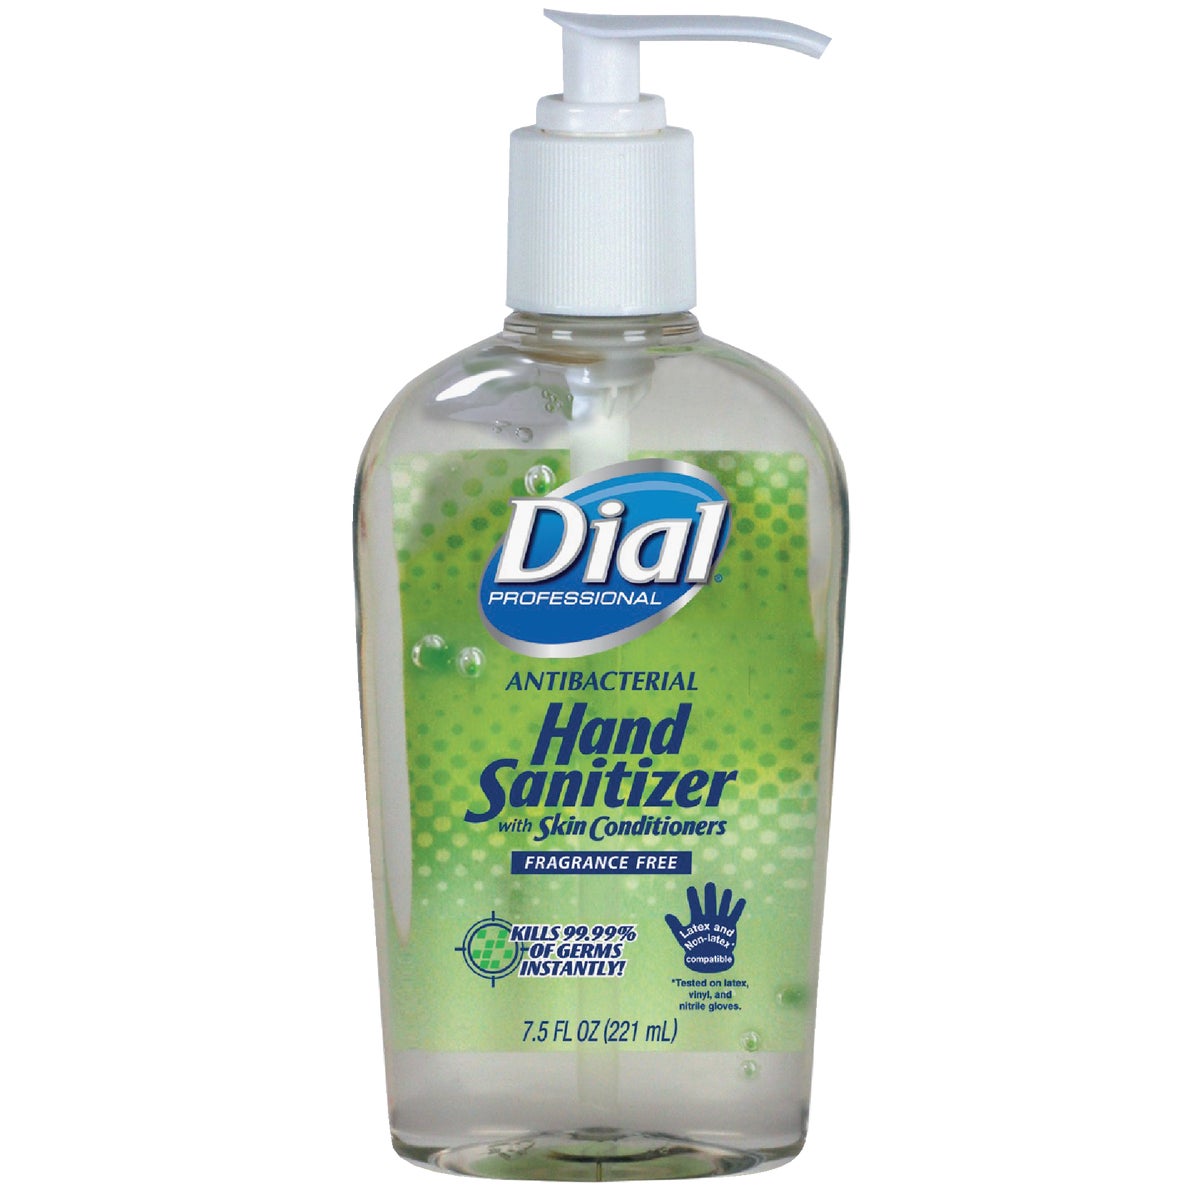 Item 601709, Dial hand sanitizer kills over 99.99% of harmful germs in 15 seconds.